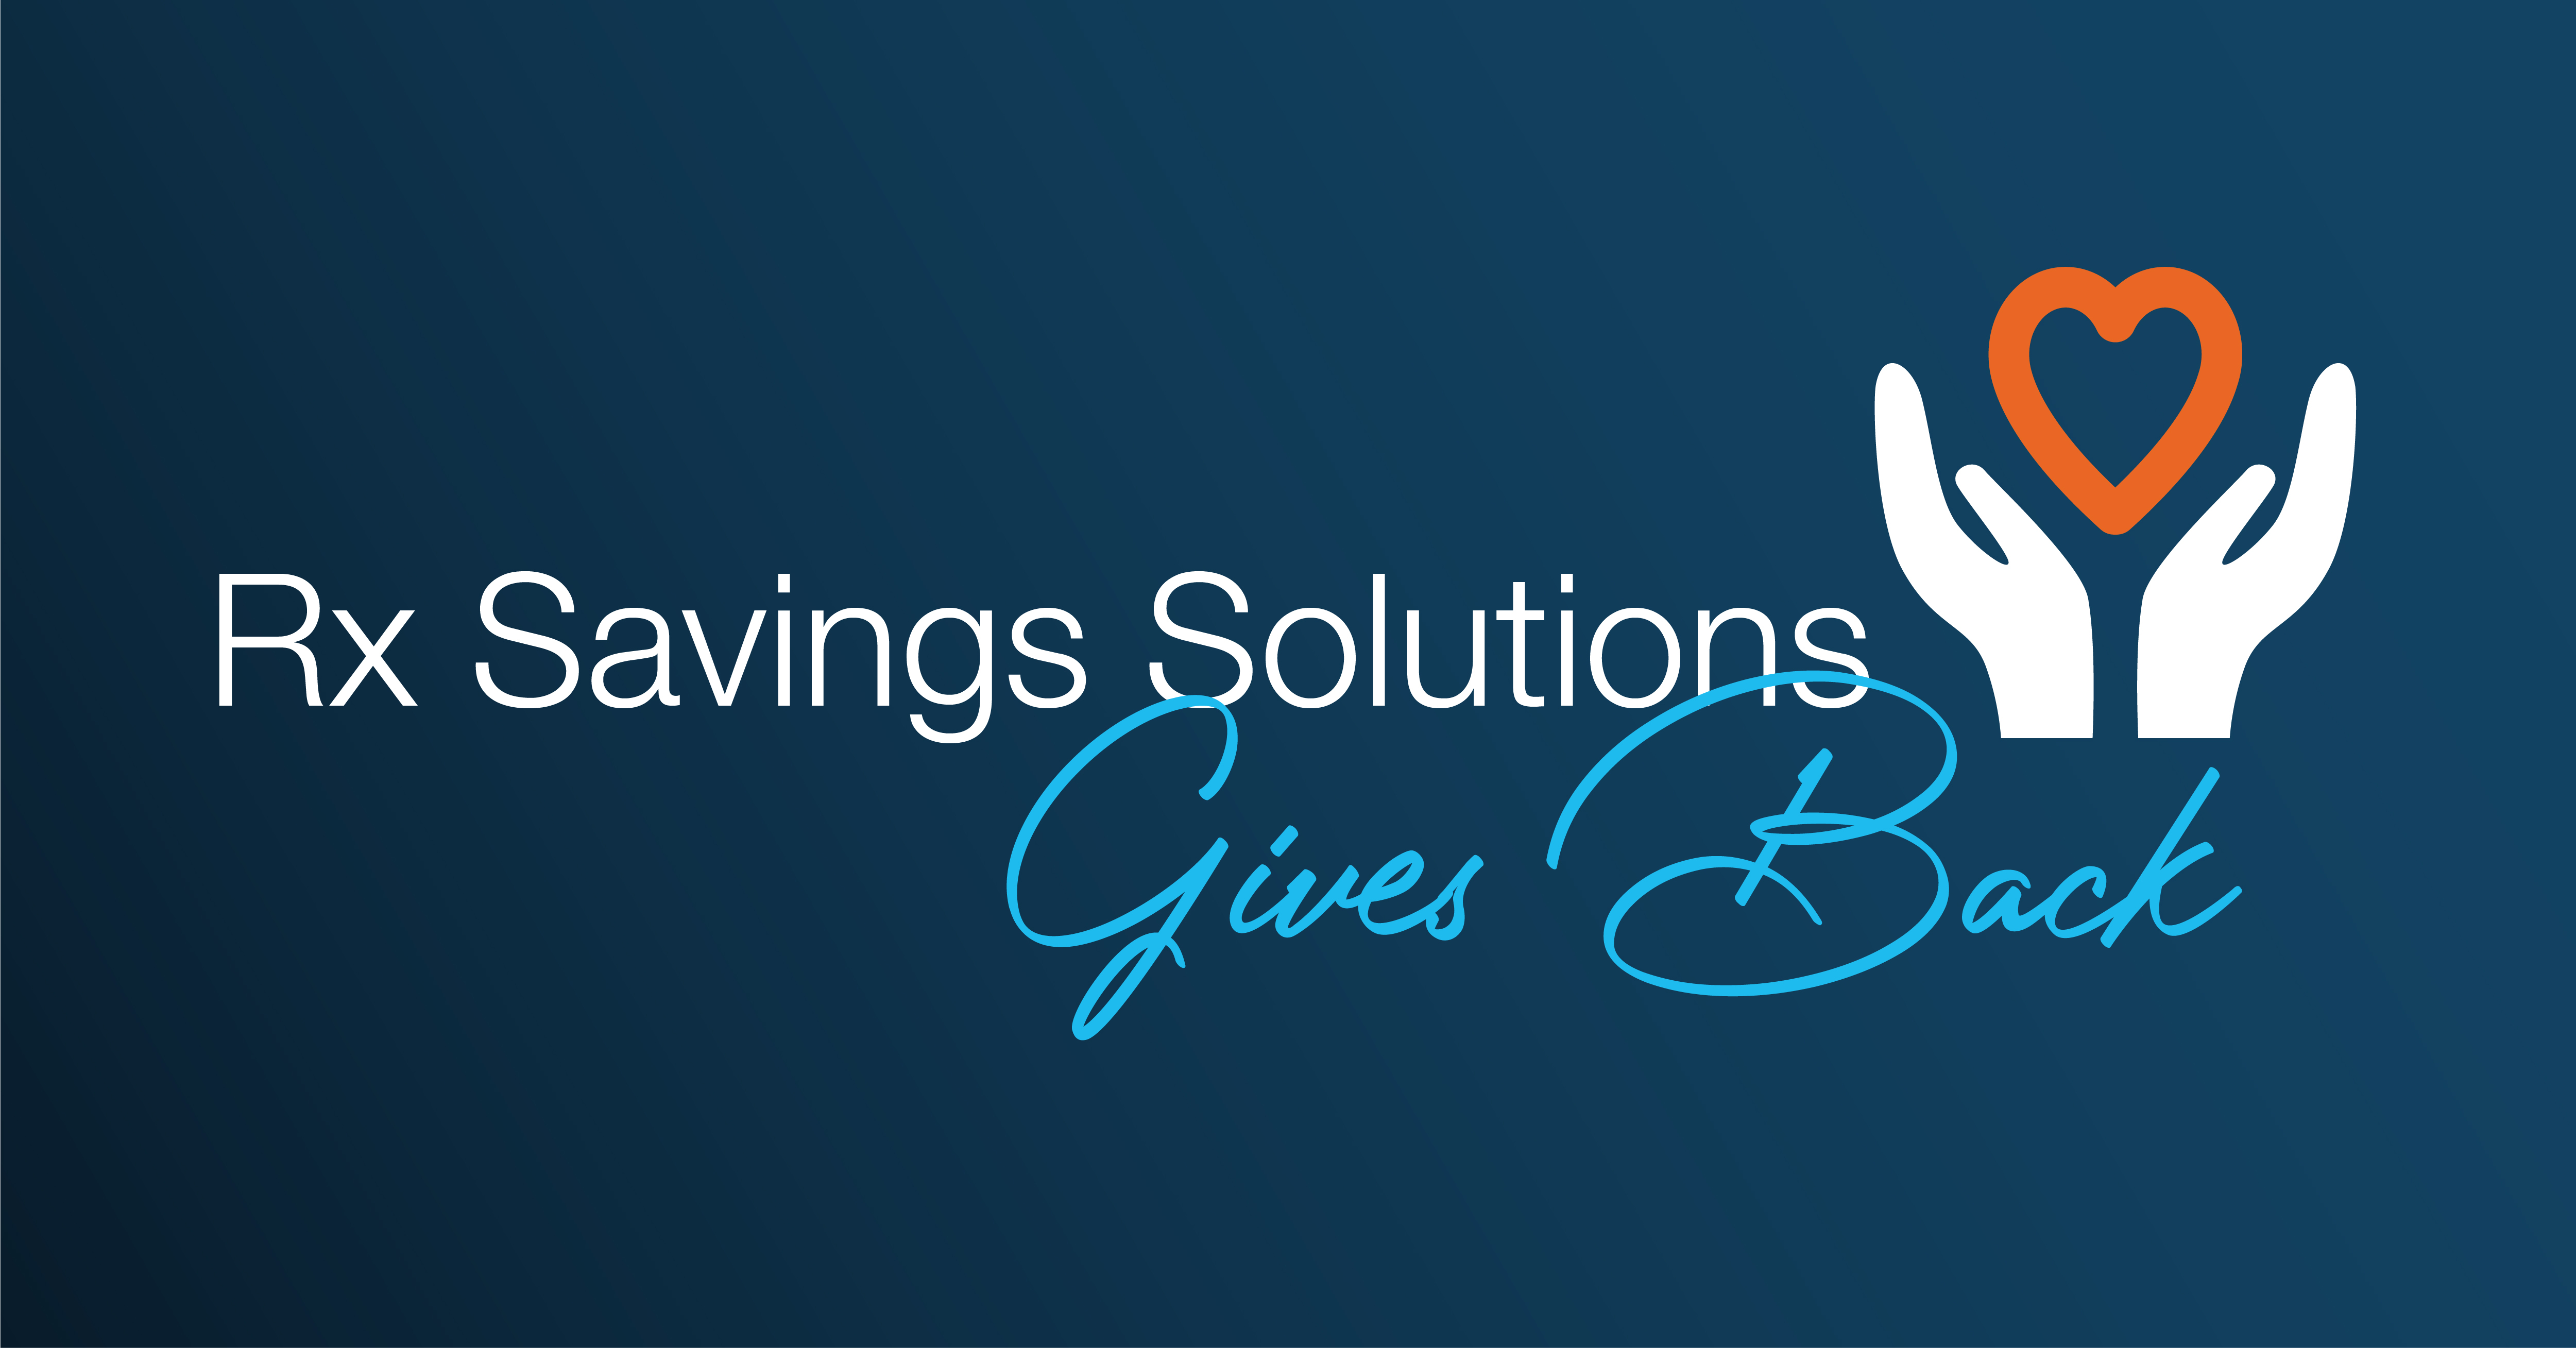 Rx Savings Solutions always gives back, especially over the holiday season.